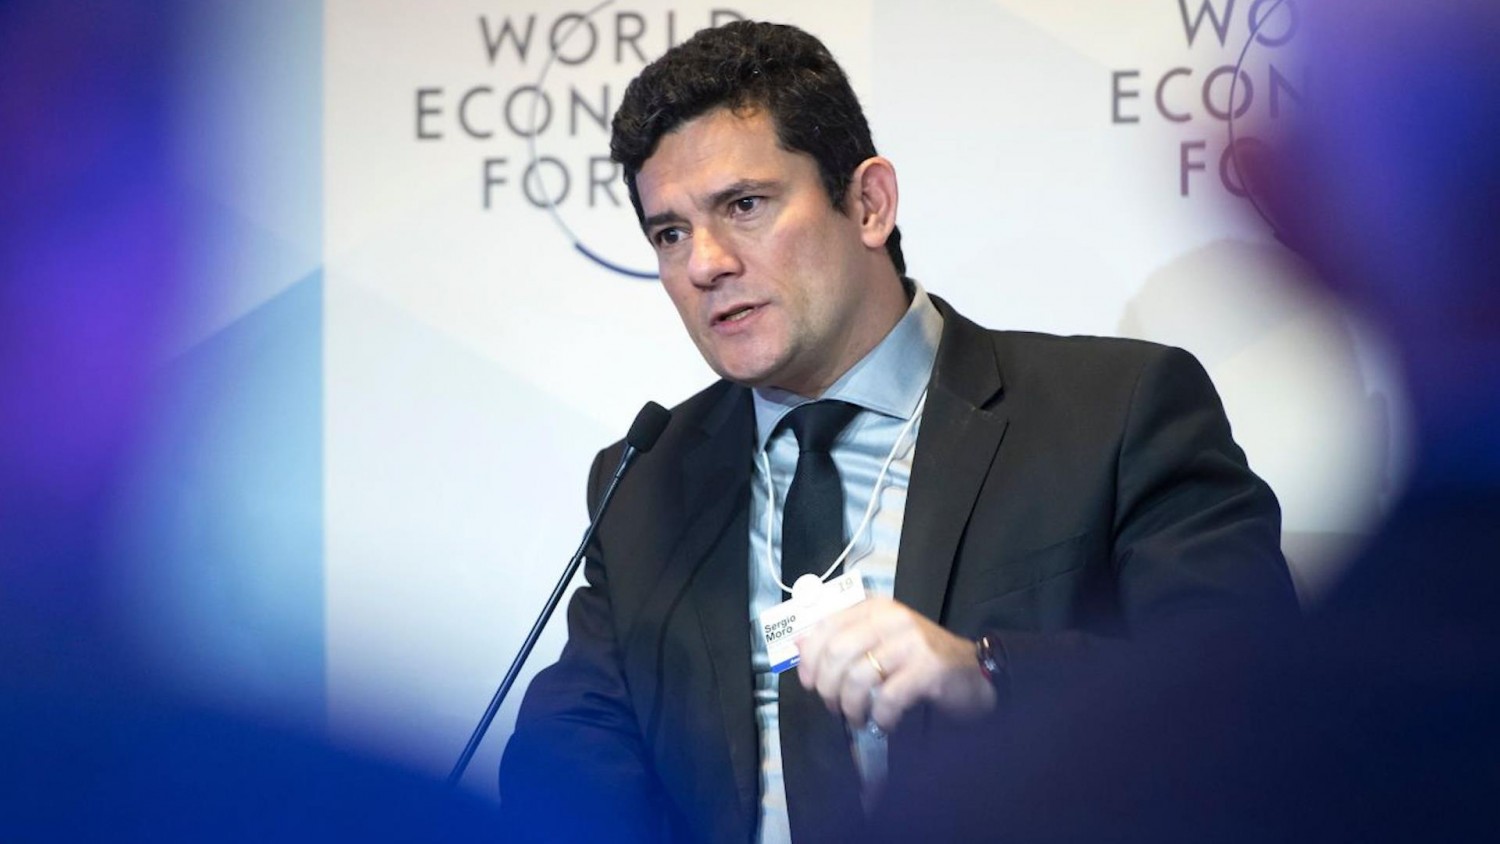 Sergio Moro, Brazil’s justice minister, sat down with The Wall Street Journal at the 2019 World Economic Forum in Davos to discuss some of the issues facing the country. Photo: Laurent Gillieron/Shutterstock (Originally published Jan. 24, 